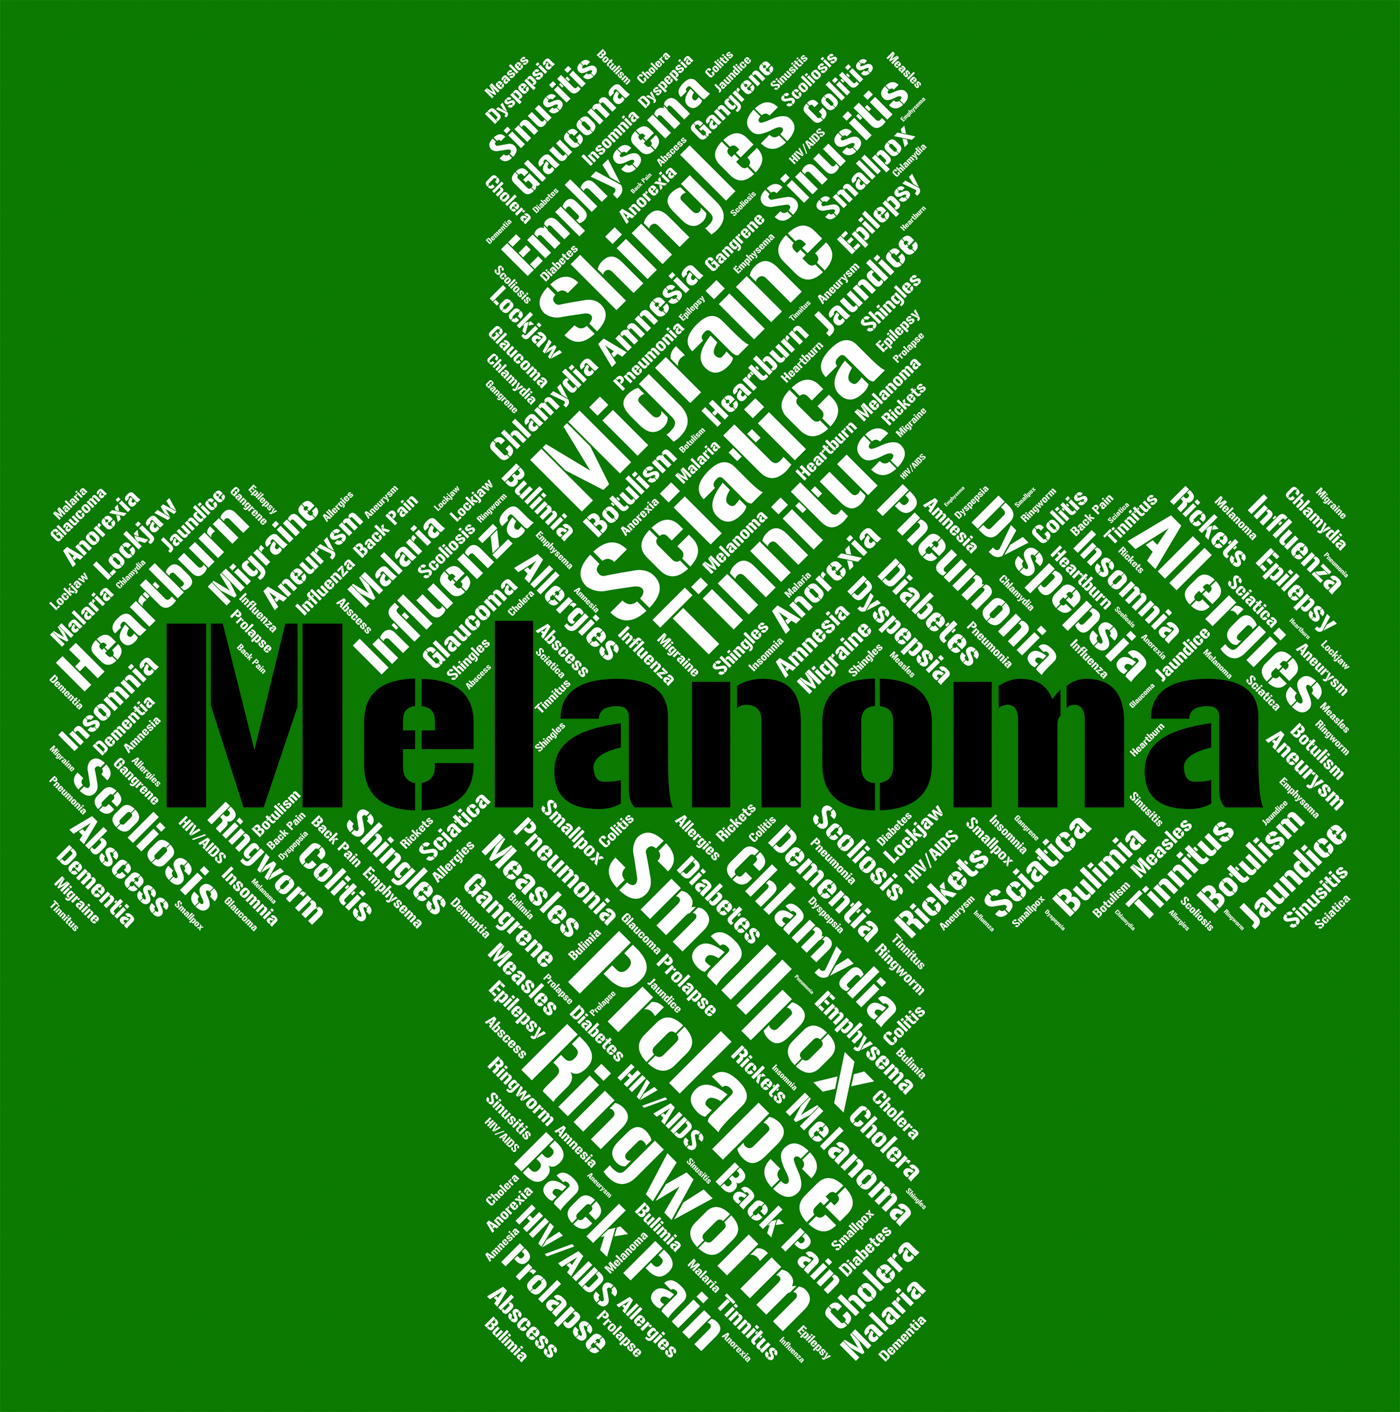 Melanoma Word Represents Skin Cancer And Affliction, Affliction, Sickness, Sick, Poorhealth, HQ Photo